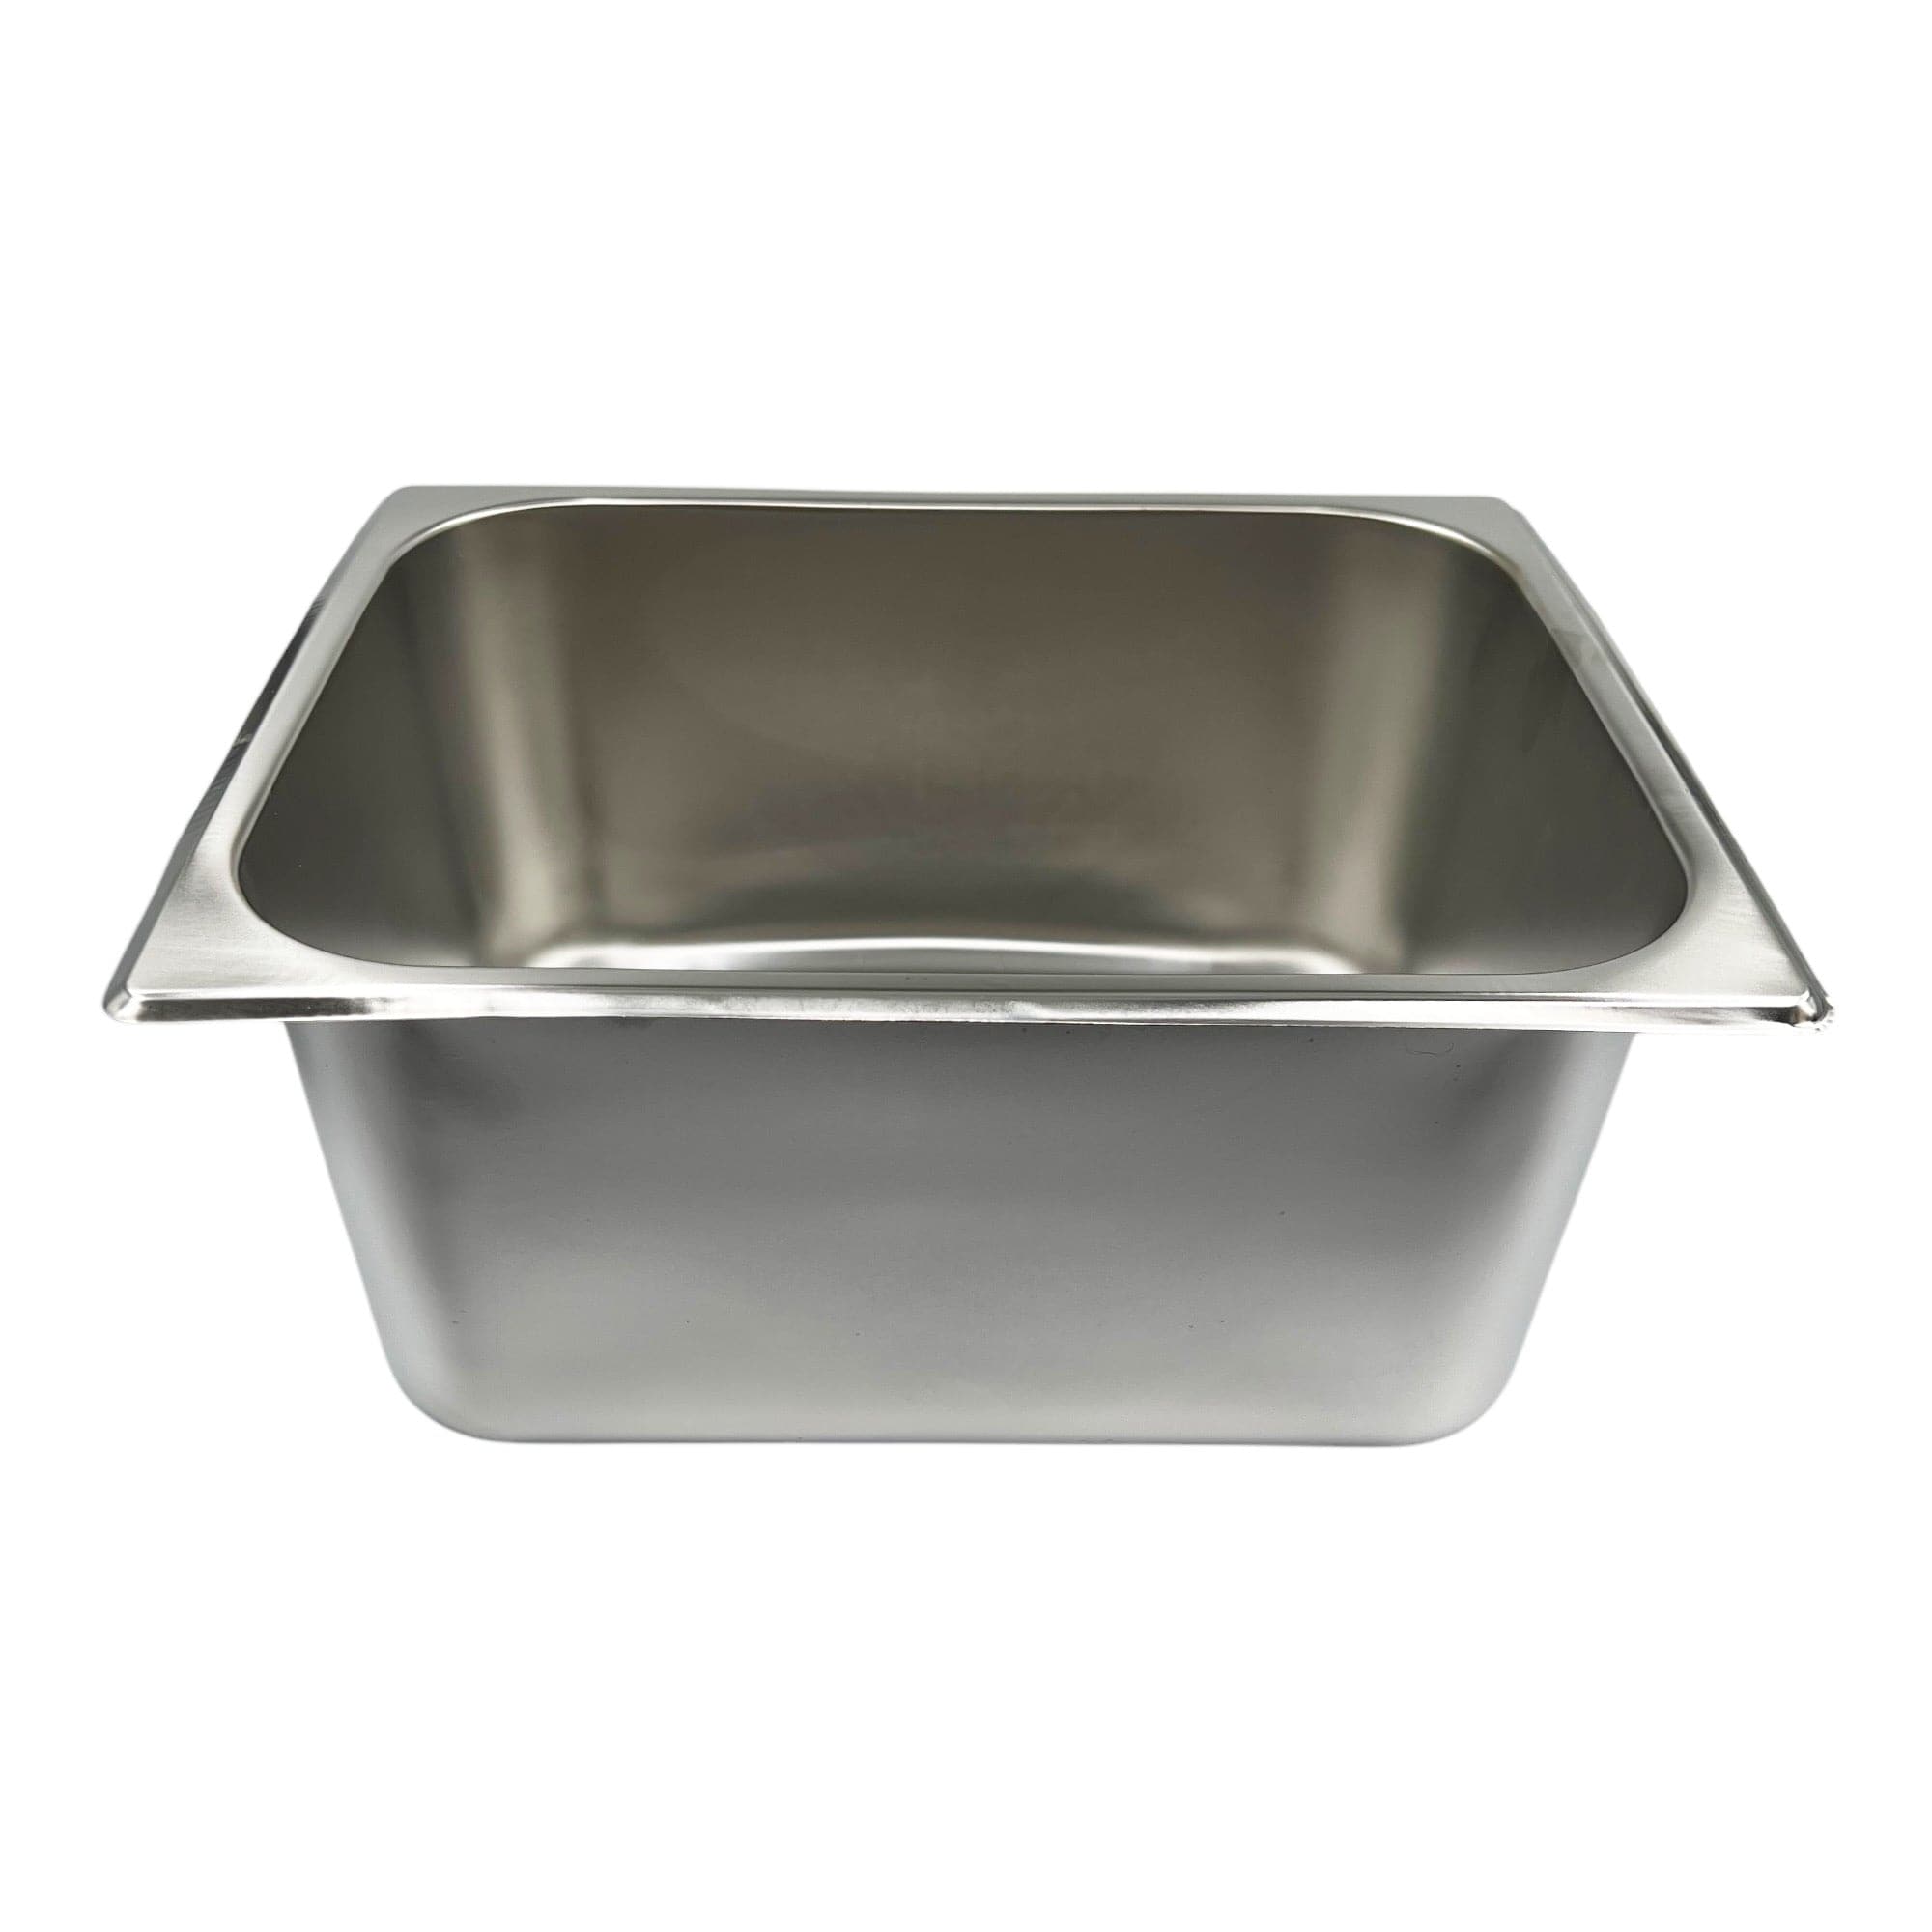 Eson - Stainless Steel Gastronorm Tray 33x27x15cm